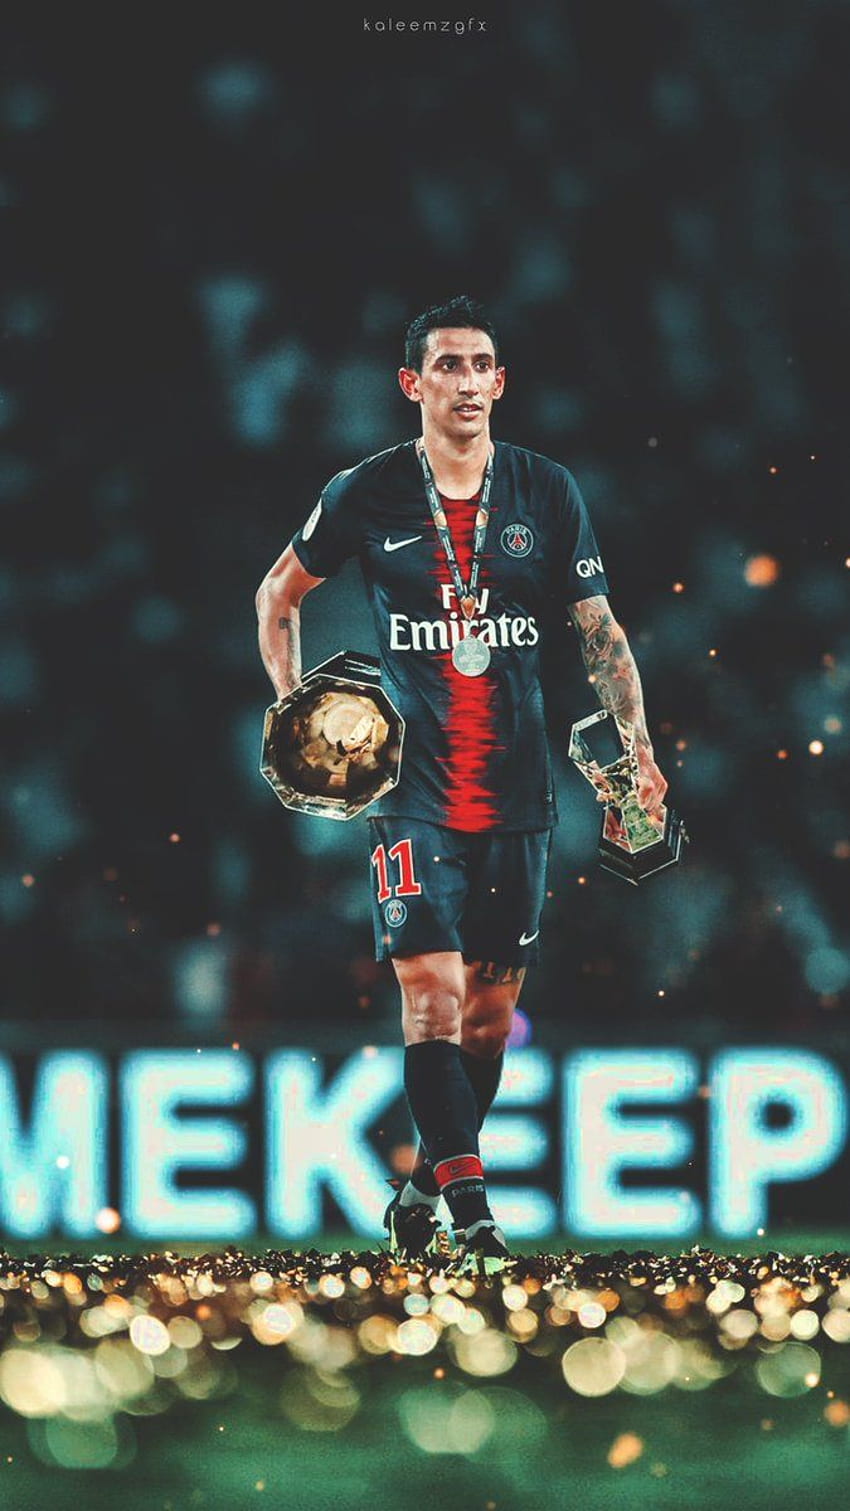 Angel Di Maria Wallpaper by workoutf on DeviantArt